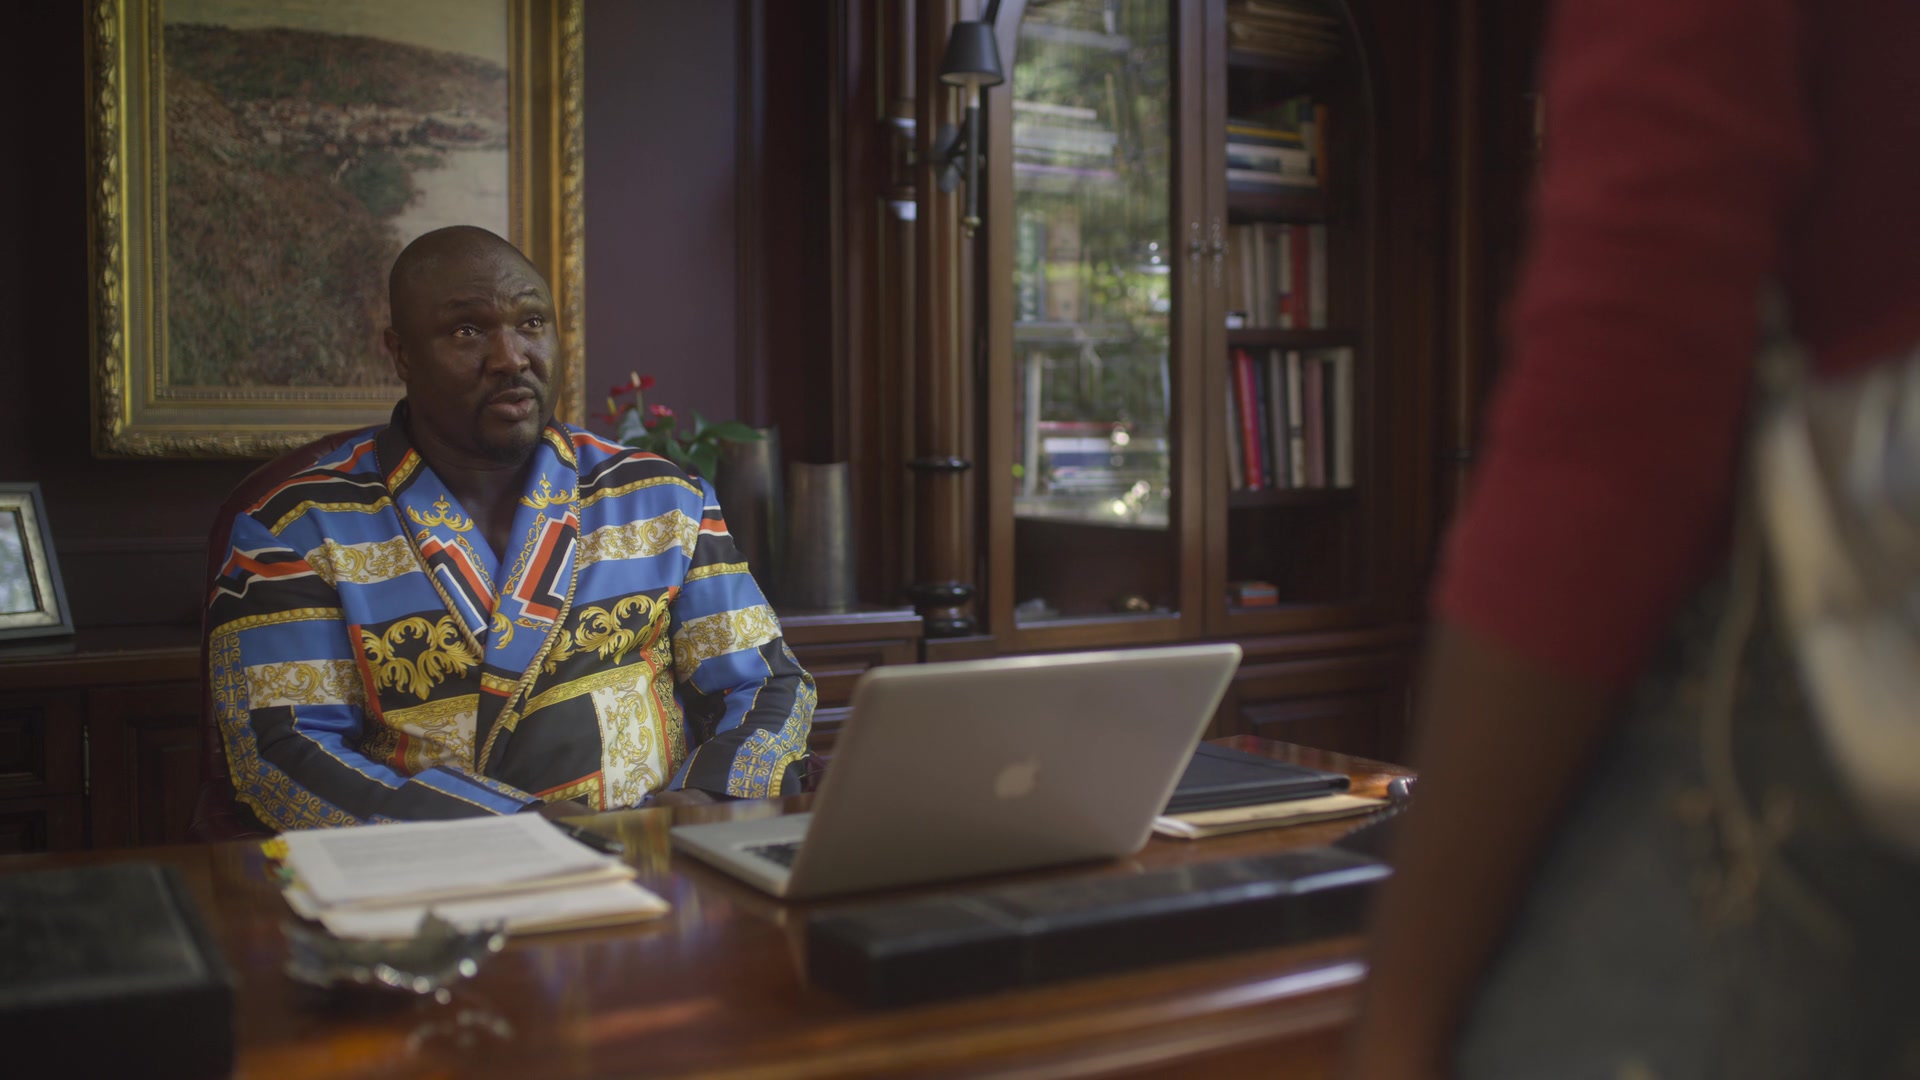 Apple Macbook Laptop Used By Nonso Anozie As Charles In The Laundromat 19